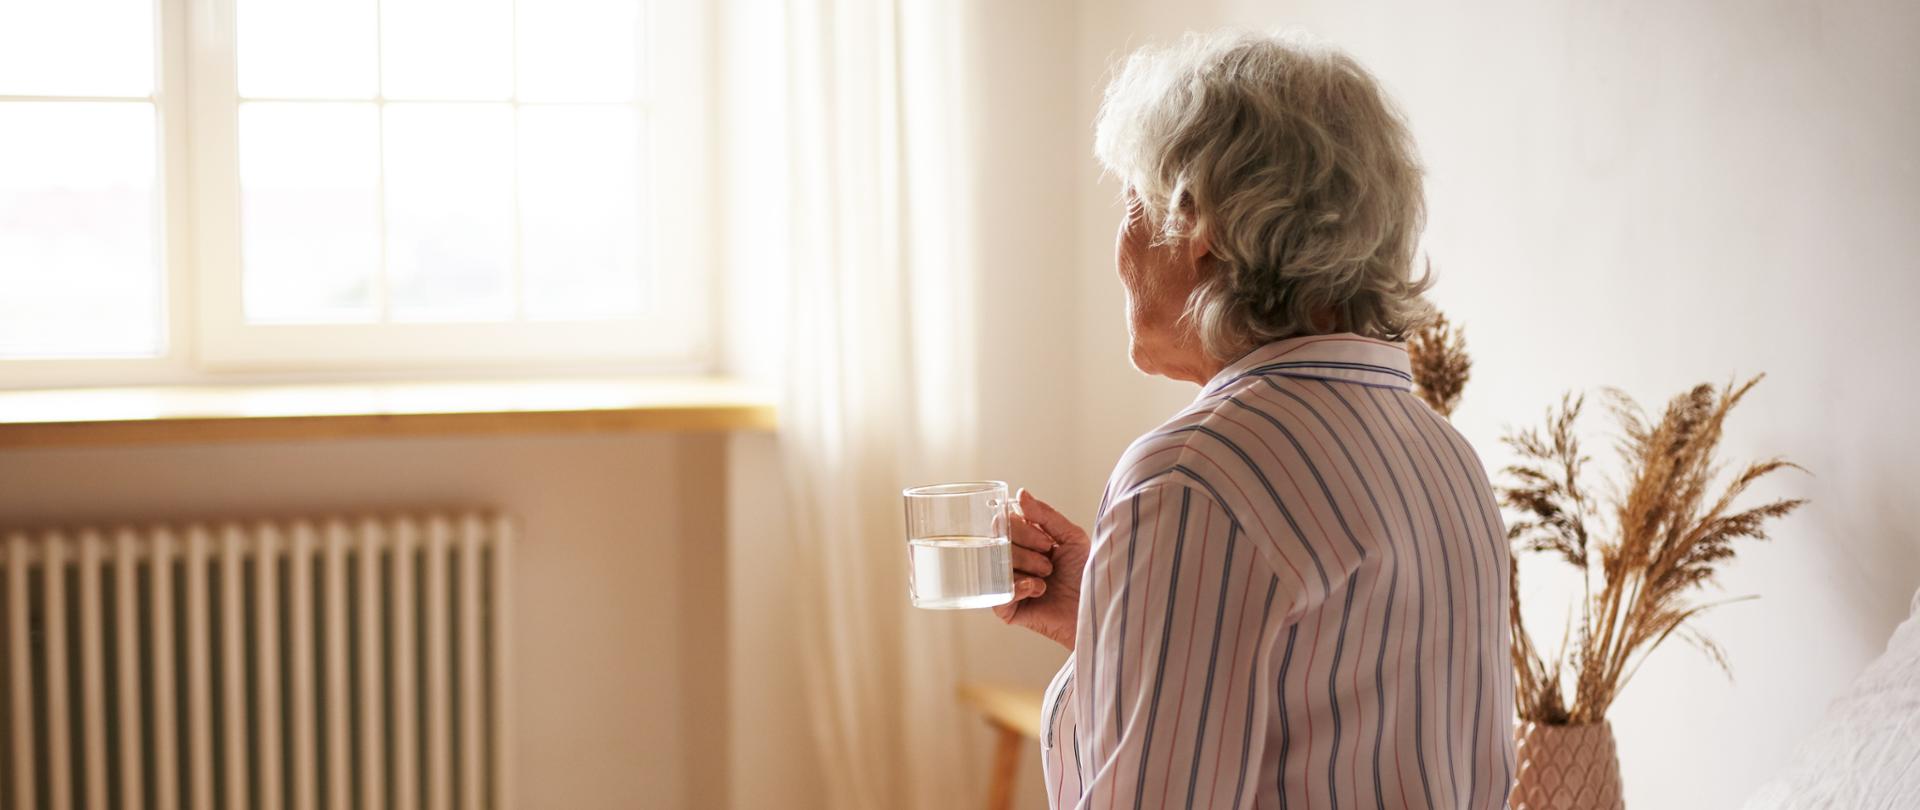 Rear view of senior sixty year old woman with gray hair holding mug washing down sleeping pill, suffering from insomnia. Elderly retired female taking medicine with water, sitting in bedroom